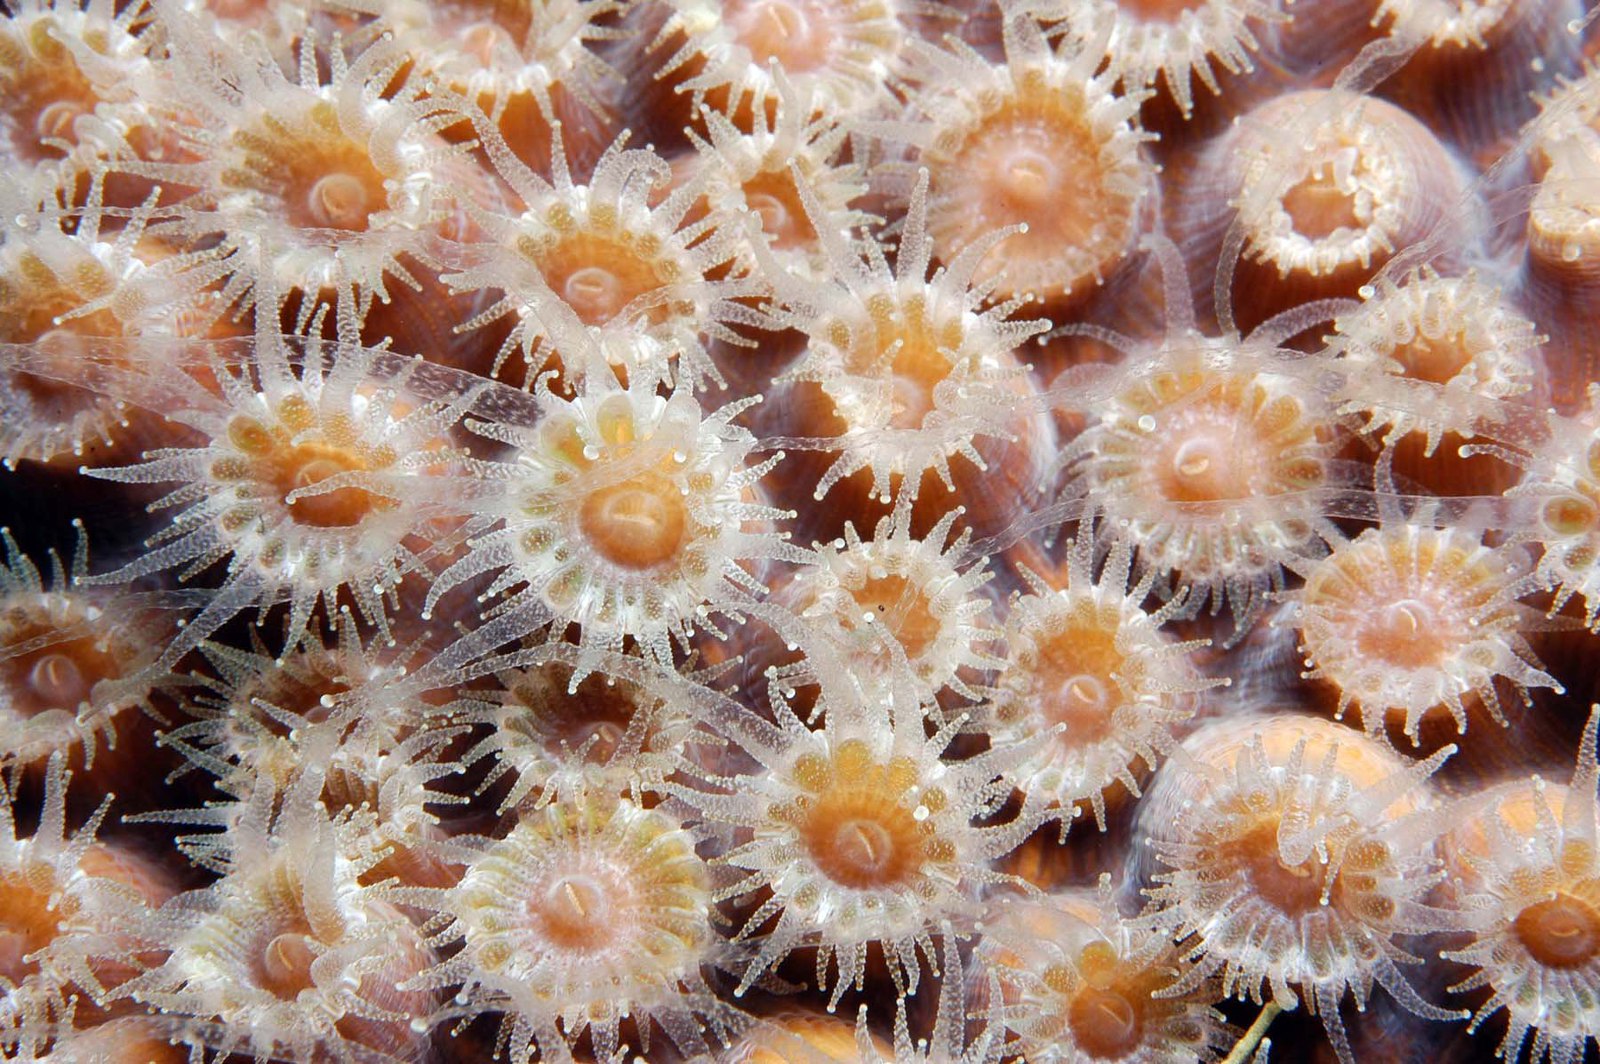 Extended coral polyps. Flower Garden Banks National Marine Sanctuary. 2006 July 3 (by G. P. Schmahl, courtesy of NOAA CC BY 2.0 DEED Photo Library via Flickr).